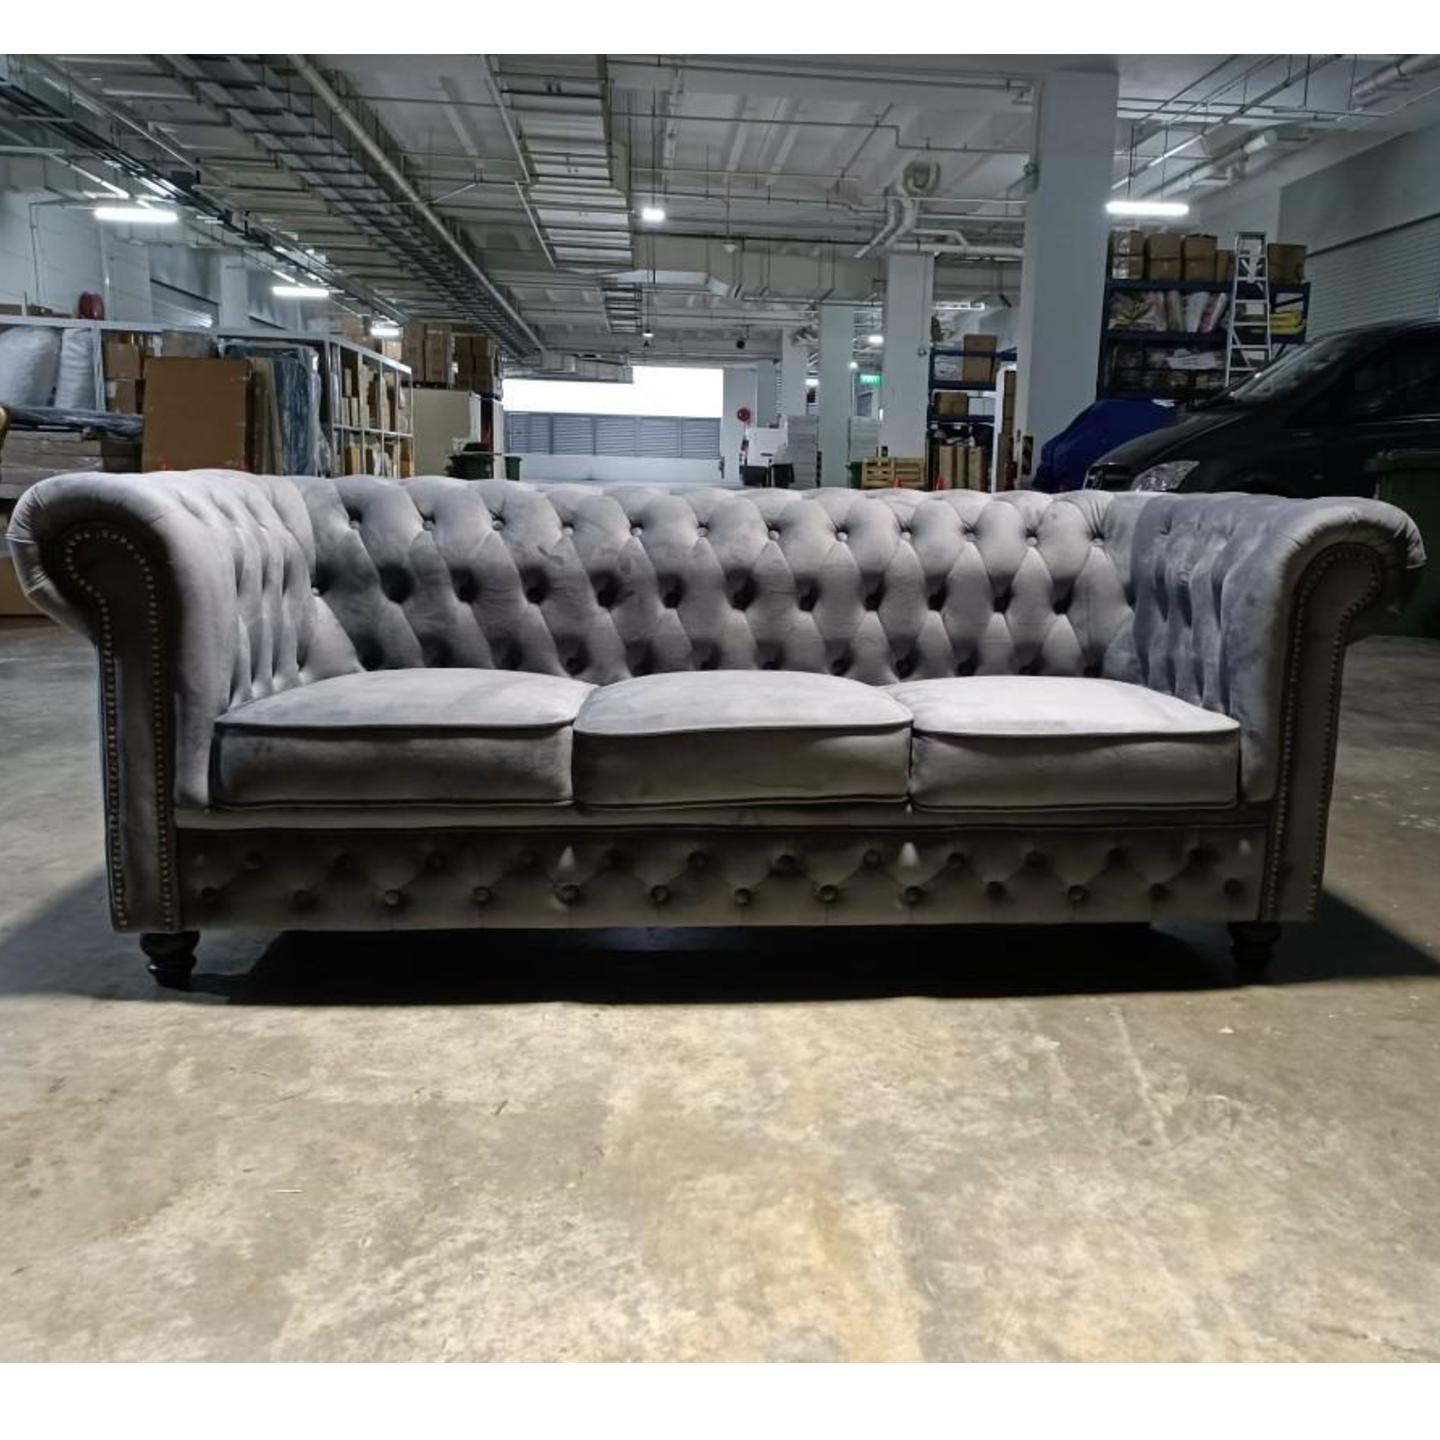 PRE ORDER SALVADORE X 3 Seater Chesterfield Sofa in STORM GREY PU - Estimated Delivery in End Apr 2022